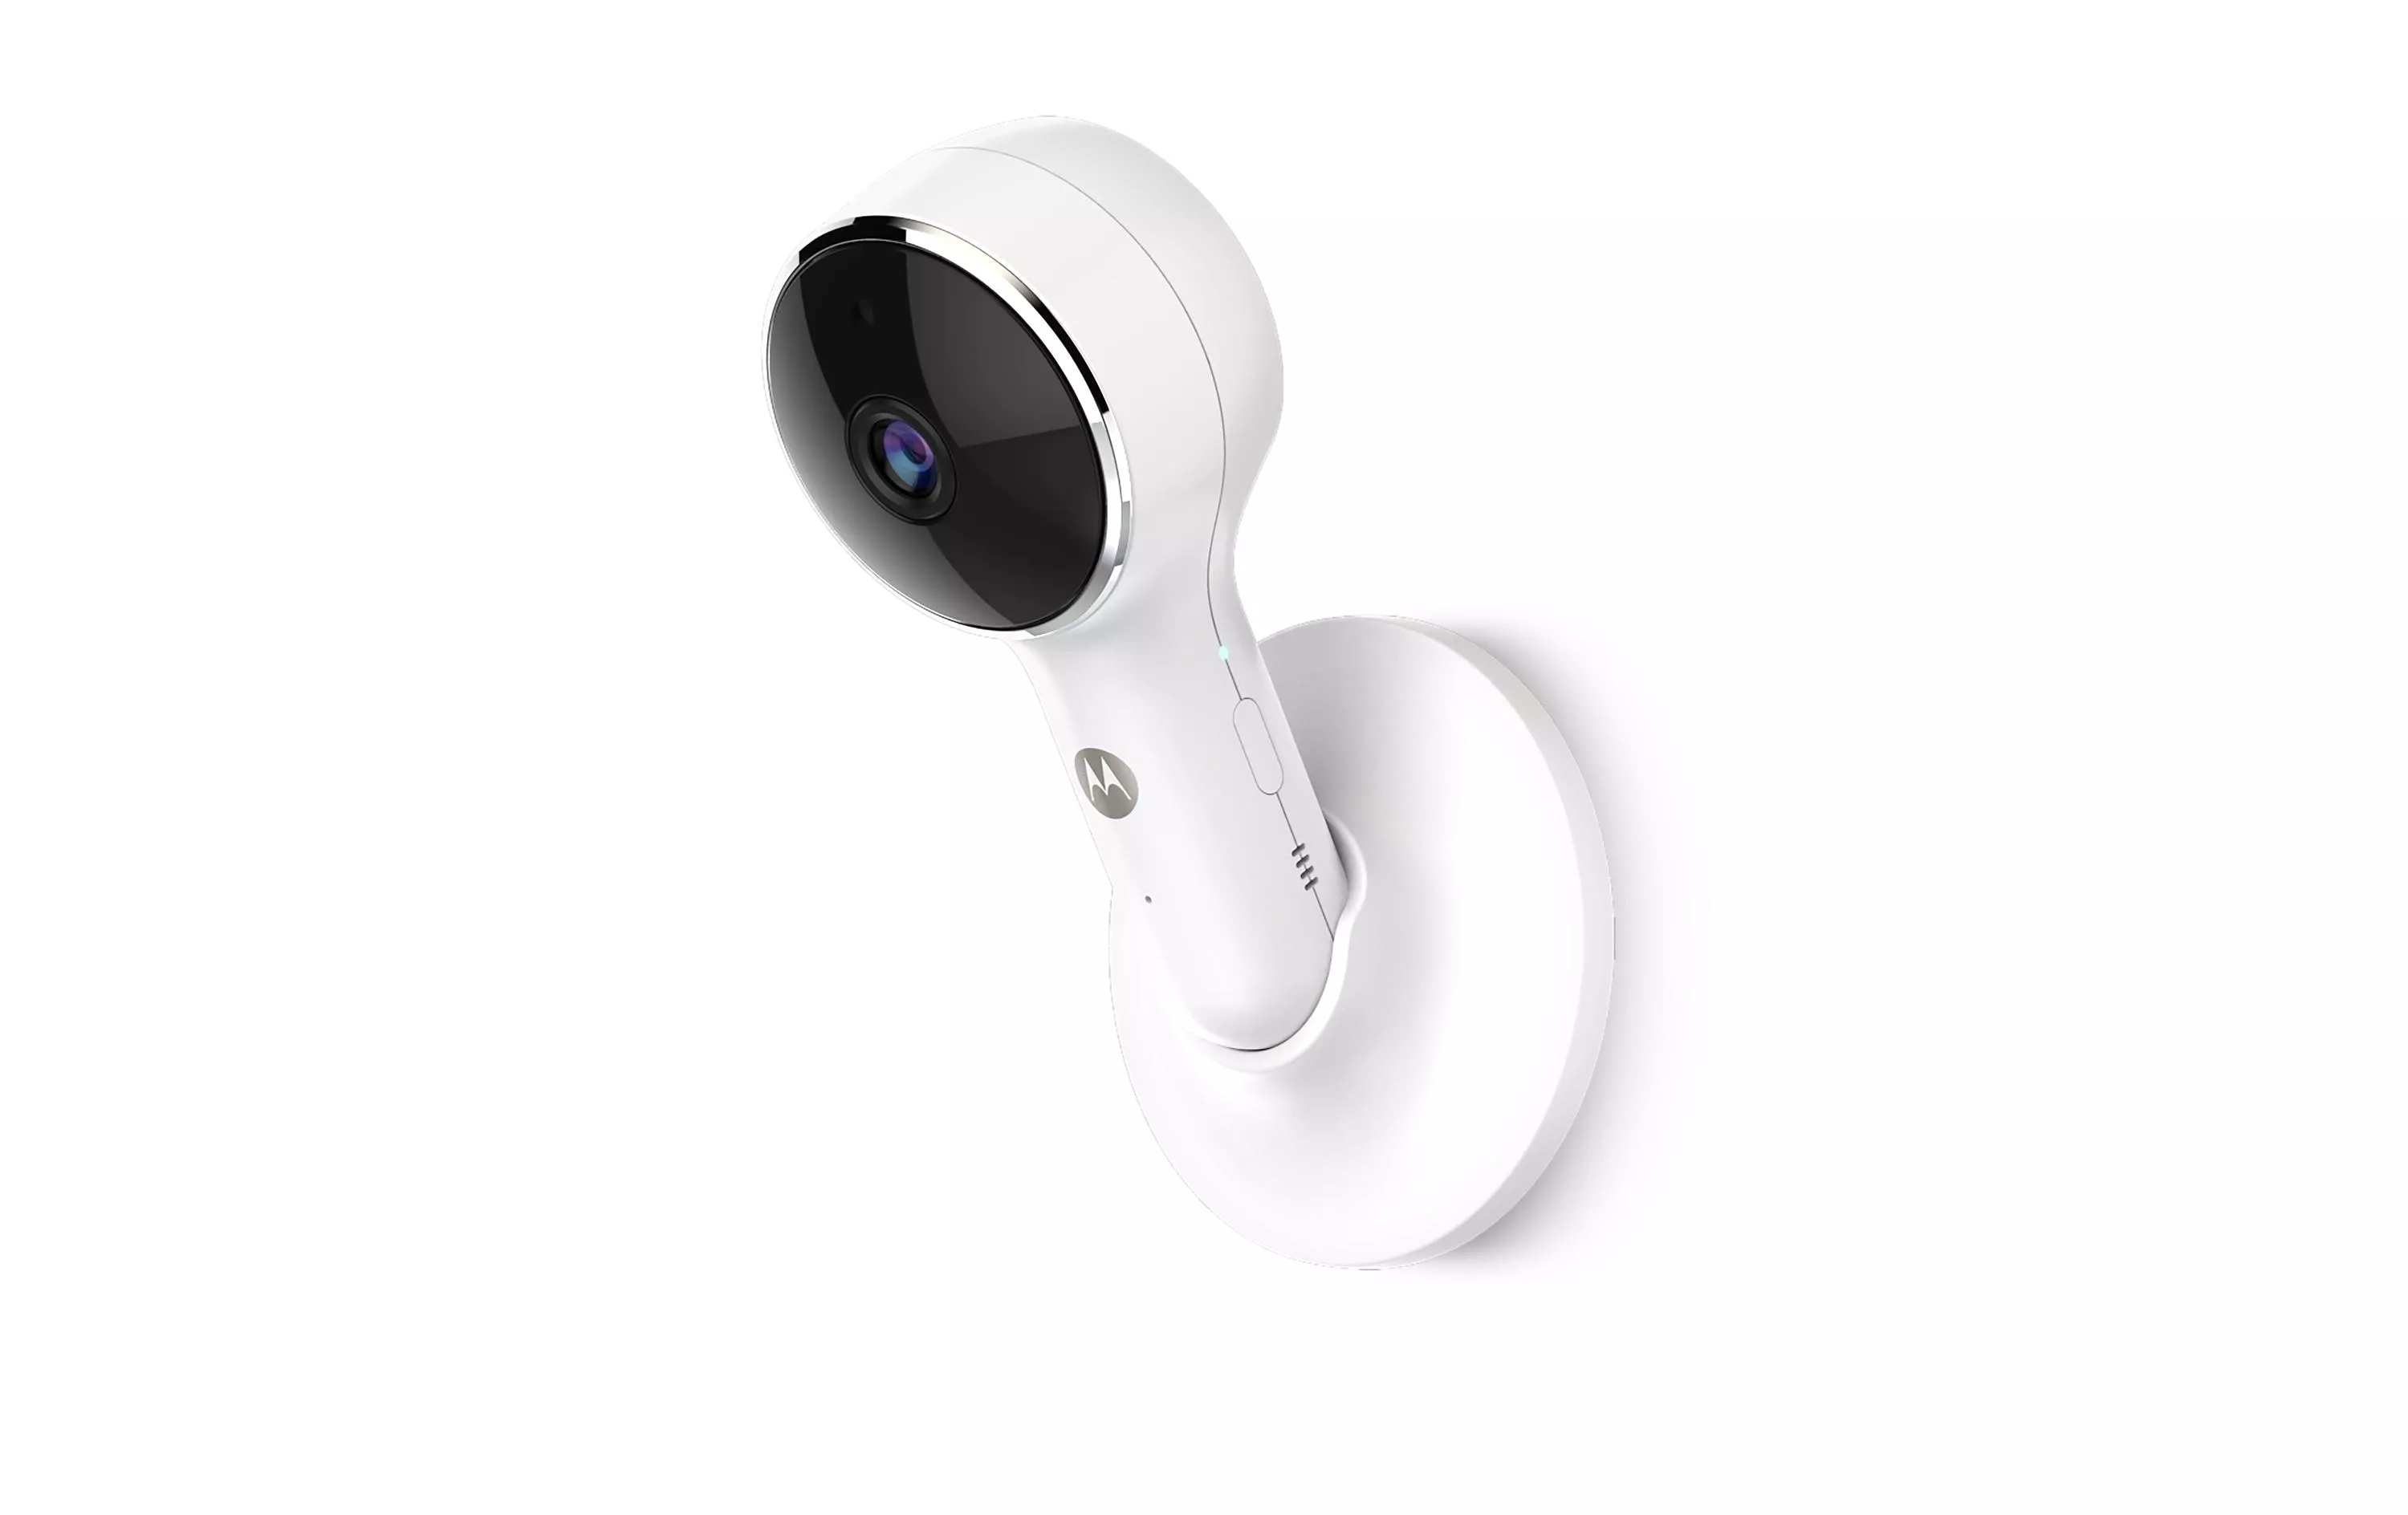 Baby Monitor VM65X Connect